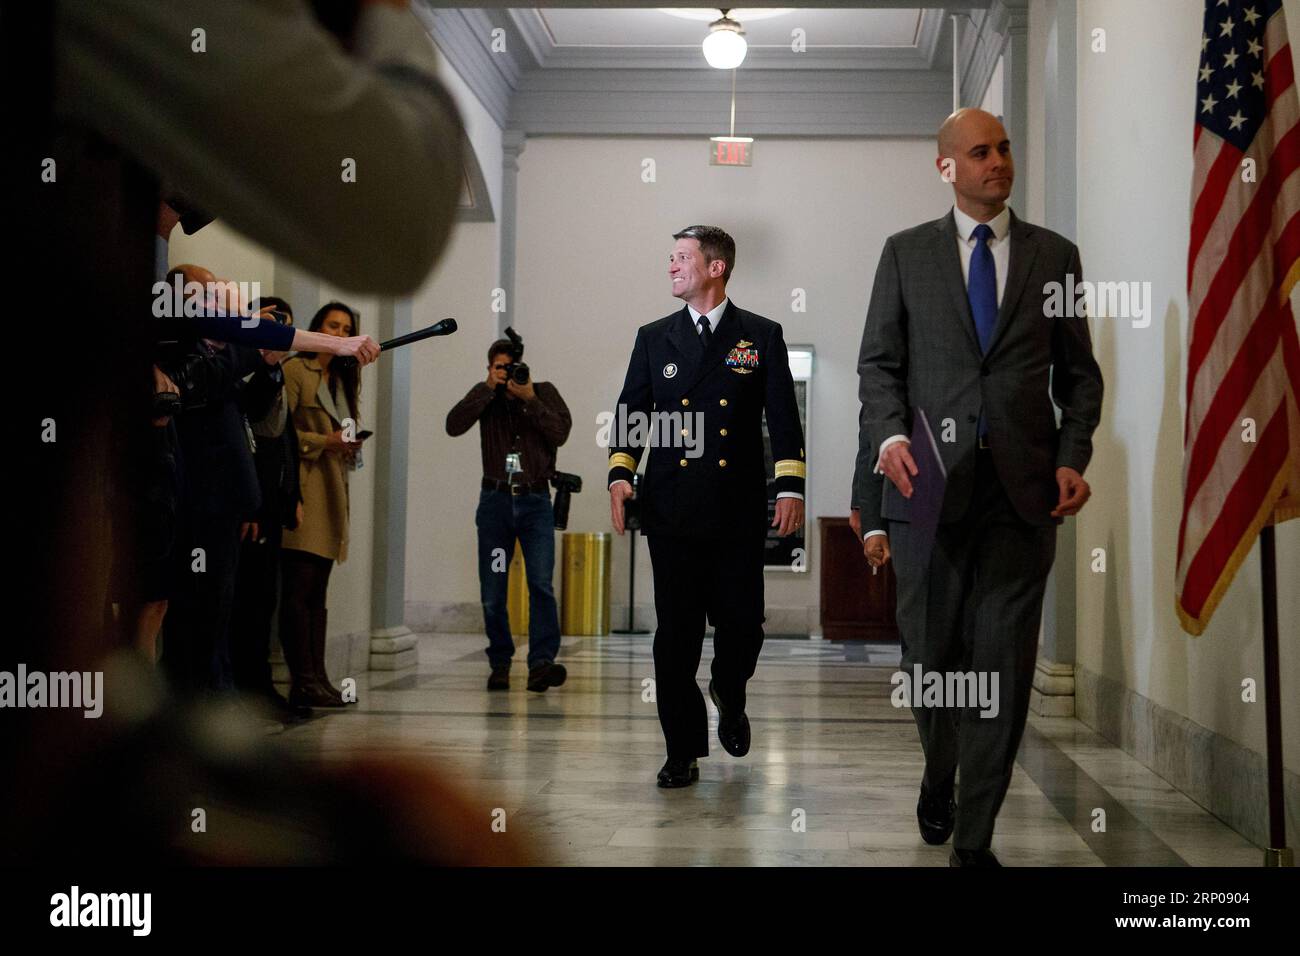 (180426) -- WASHINGTON, April 26, 2018 -- Veterans Affairs Secretary nominee Ronny Jackson (C) is seen on Capitol Hill in Washington D.C., the United States, on April 16, 2018. White House physician Ronny Jackson announced on April 26 that he had withdrawn from President Donald Trump s nomination to be the next Veterans Affairs Secretary, in the wake of a series of allegations that he had fostered a hostile work environment and behaved improperly while serving as the top doctor in the White House. ) U.S.-WASHINGTON D.C.-VETERANS AFFAIRS SECRETARY-NOMINEE-WITHDRAWAL TingxShen PUBLICATIONxNOTxIN Stock Photo